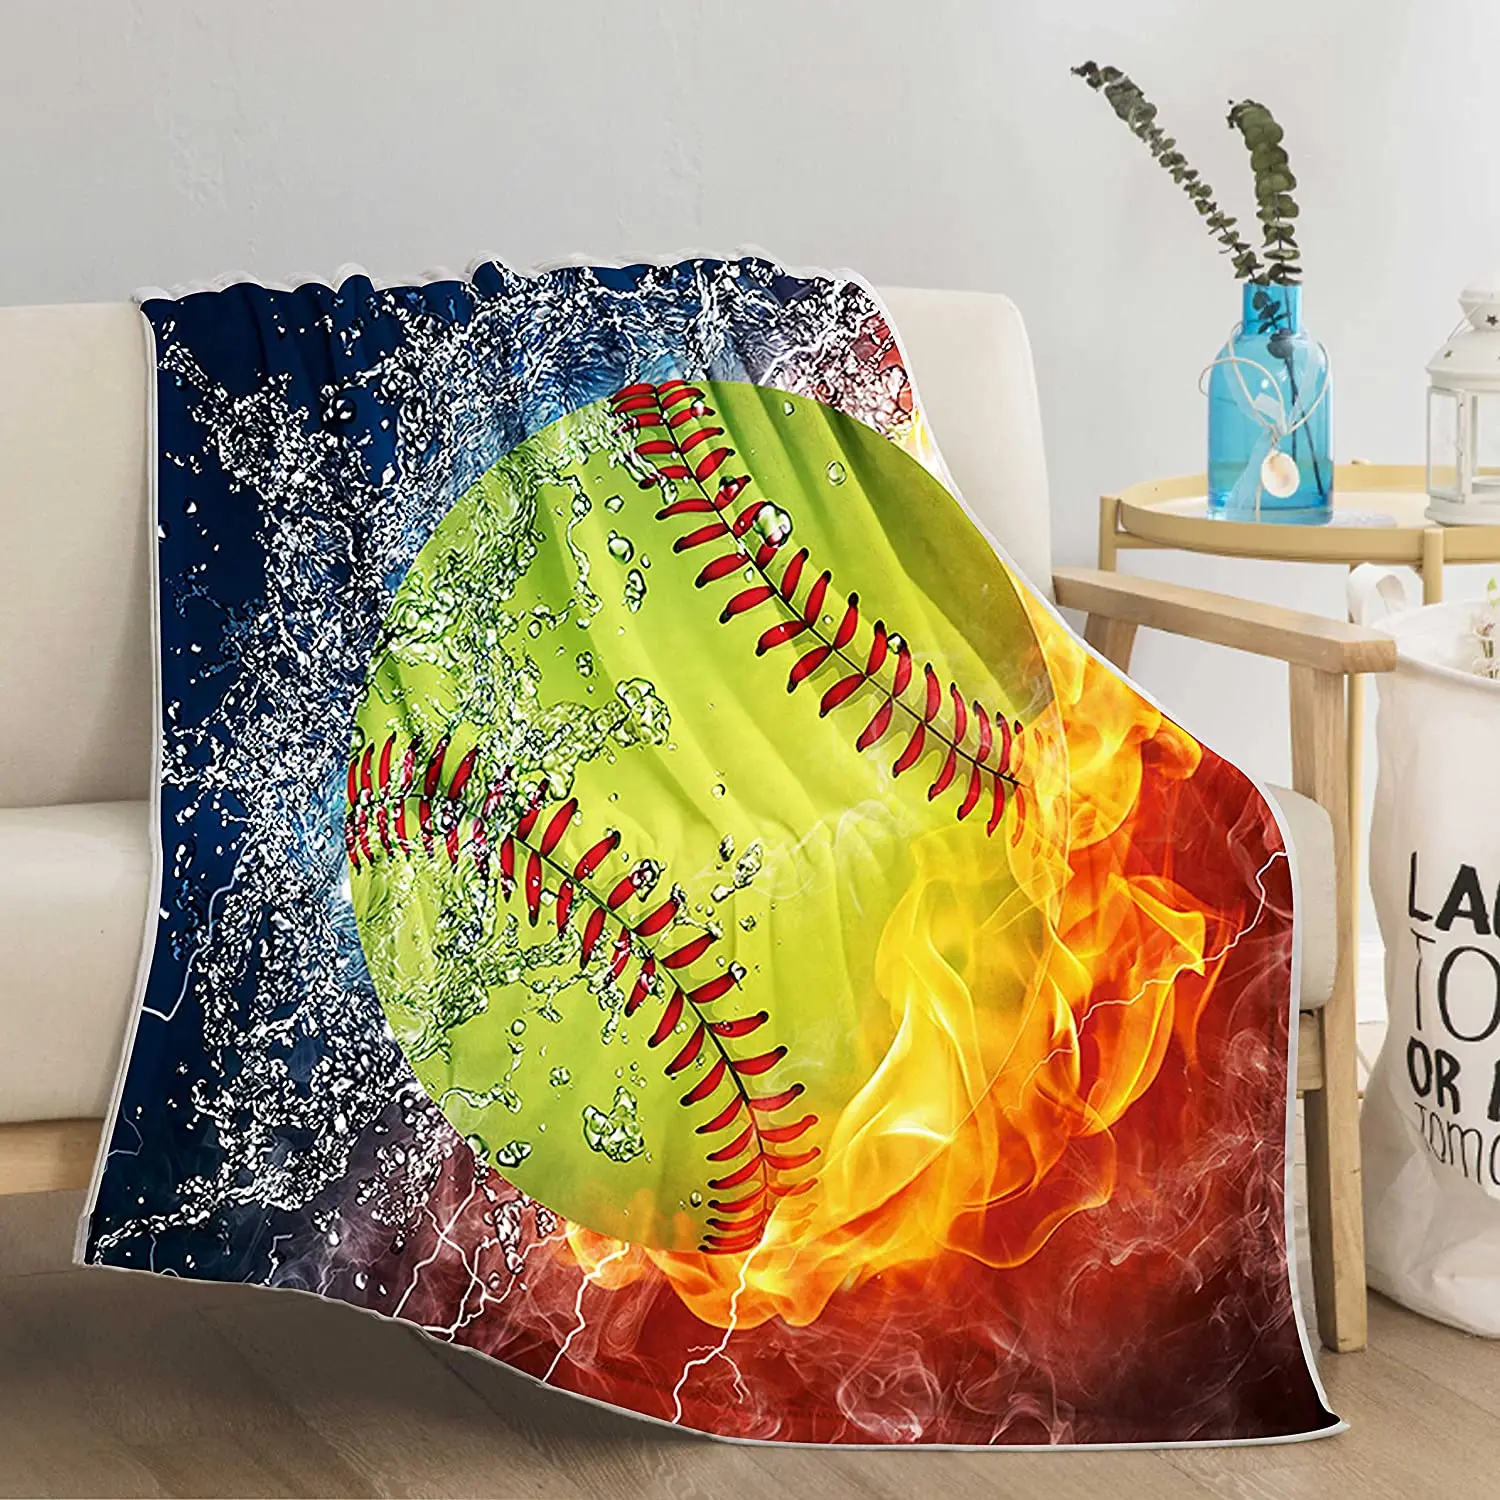 oftball Throw Blanket for Couch, Warm Cozy Soft Fuzzy Throw Blankets for Kids Teens Birthday or Christmas,Yellow Baseball